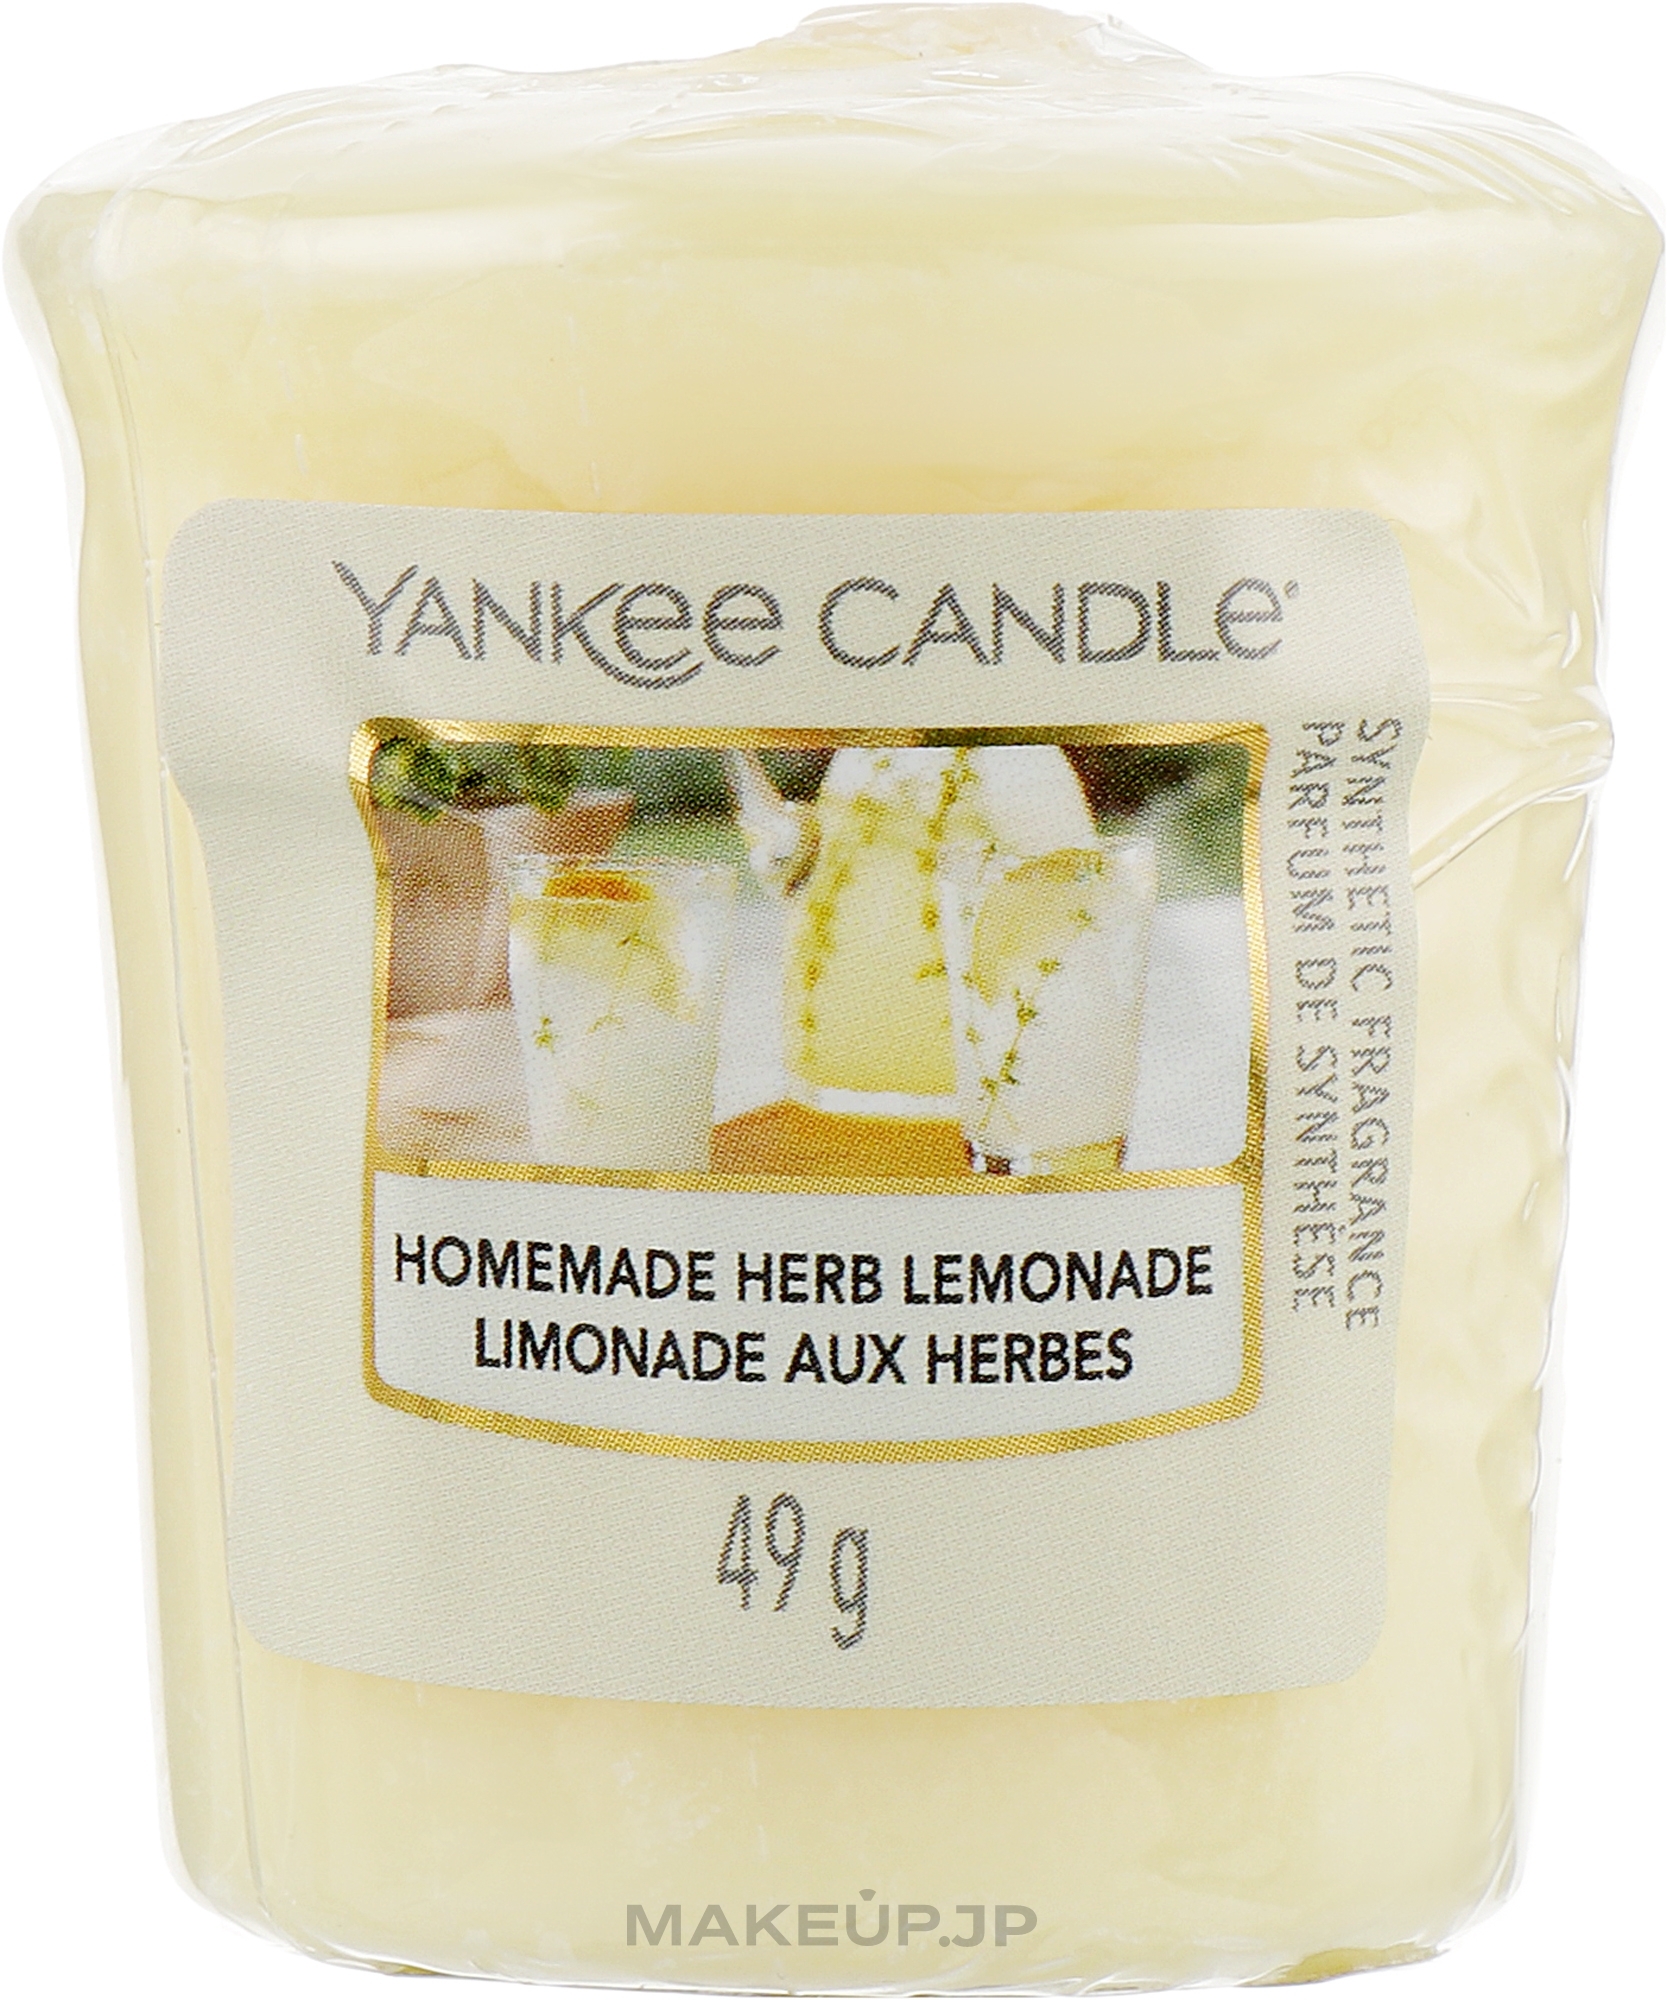 Scented Candle - Yankee Candle Votiv Homemade Herb Lemonade — photo 49 g